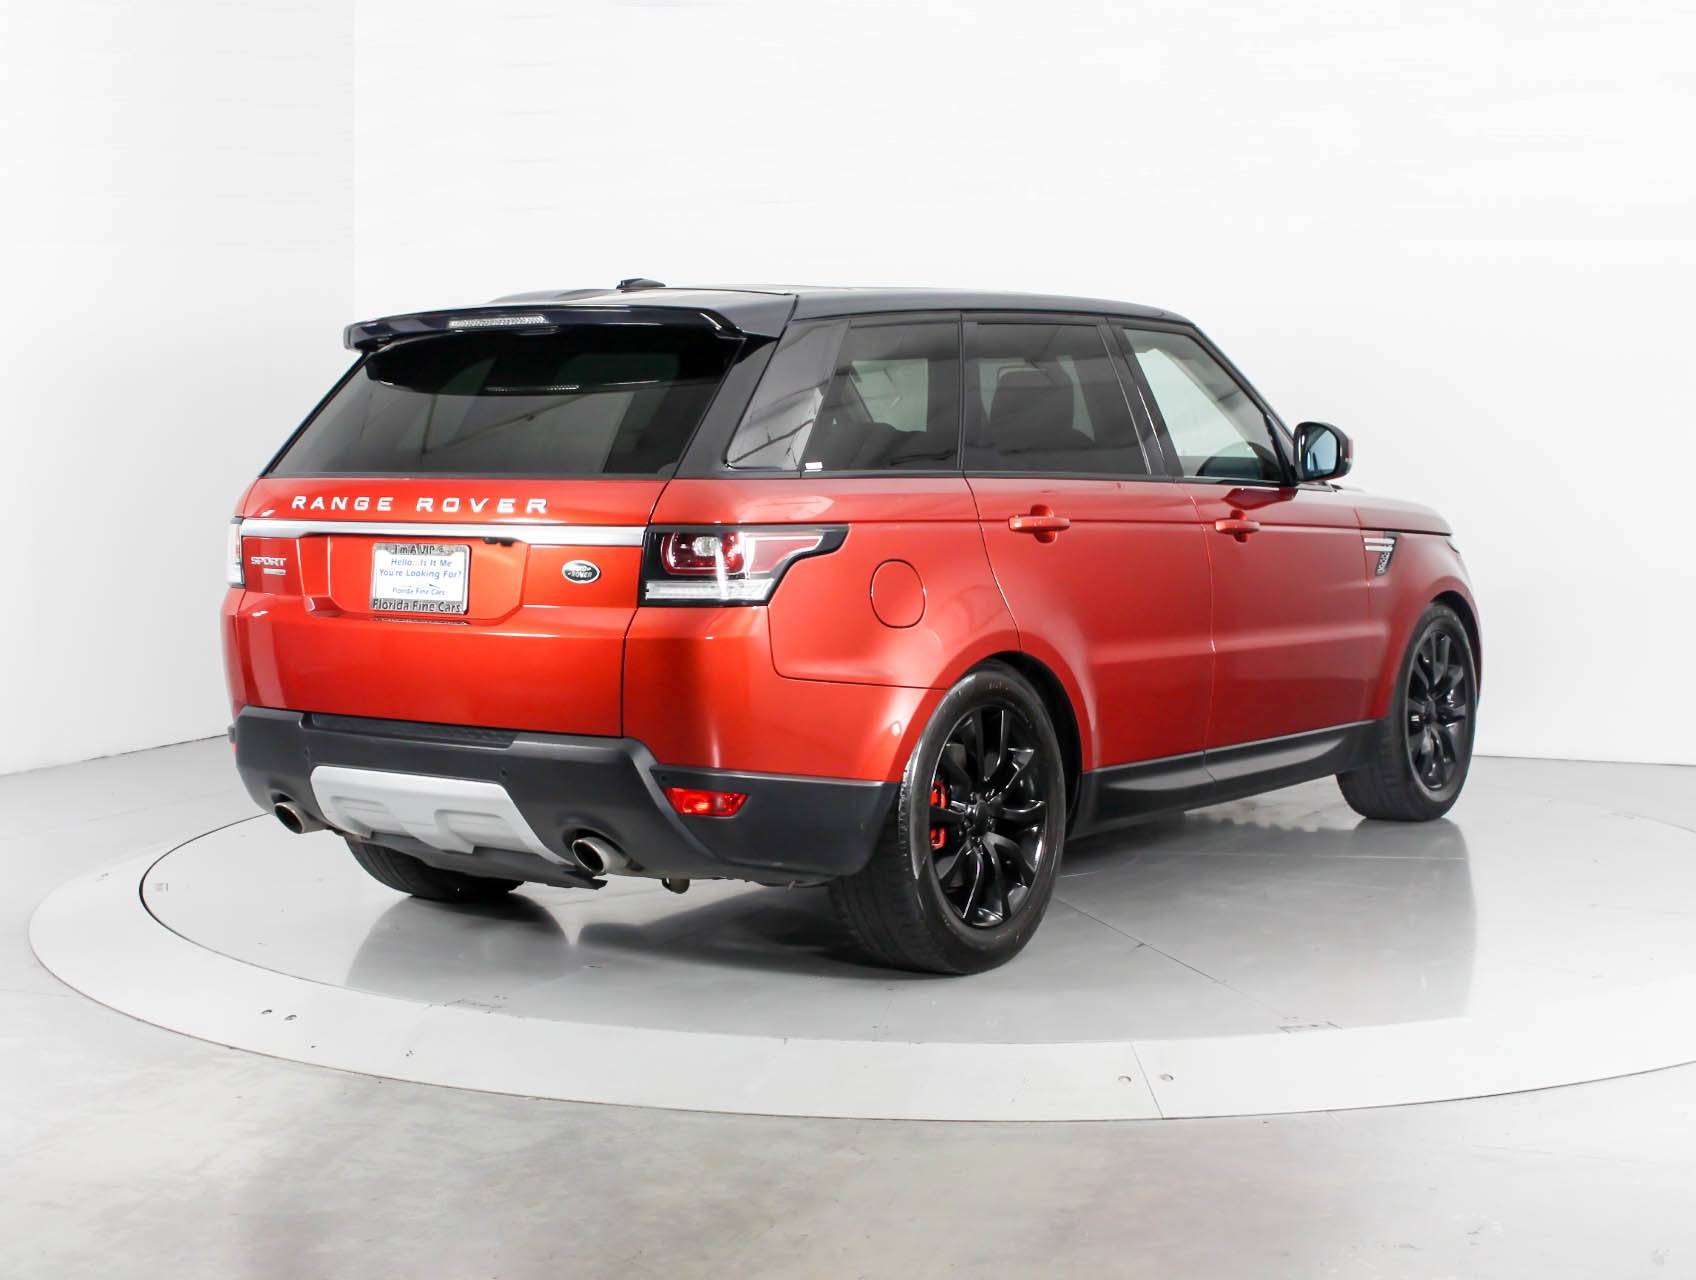 Florida Fine Cars - Used LAND ROVER RANGE ROVER SPORT 2015 MIAMI SUPERCHARGED